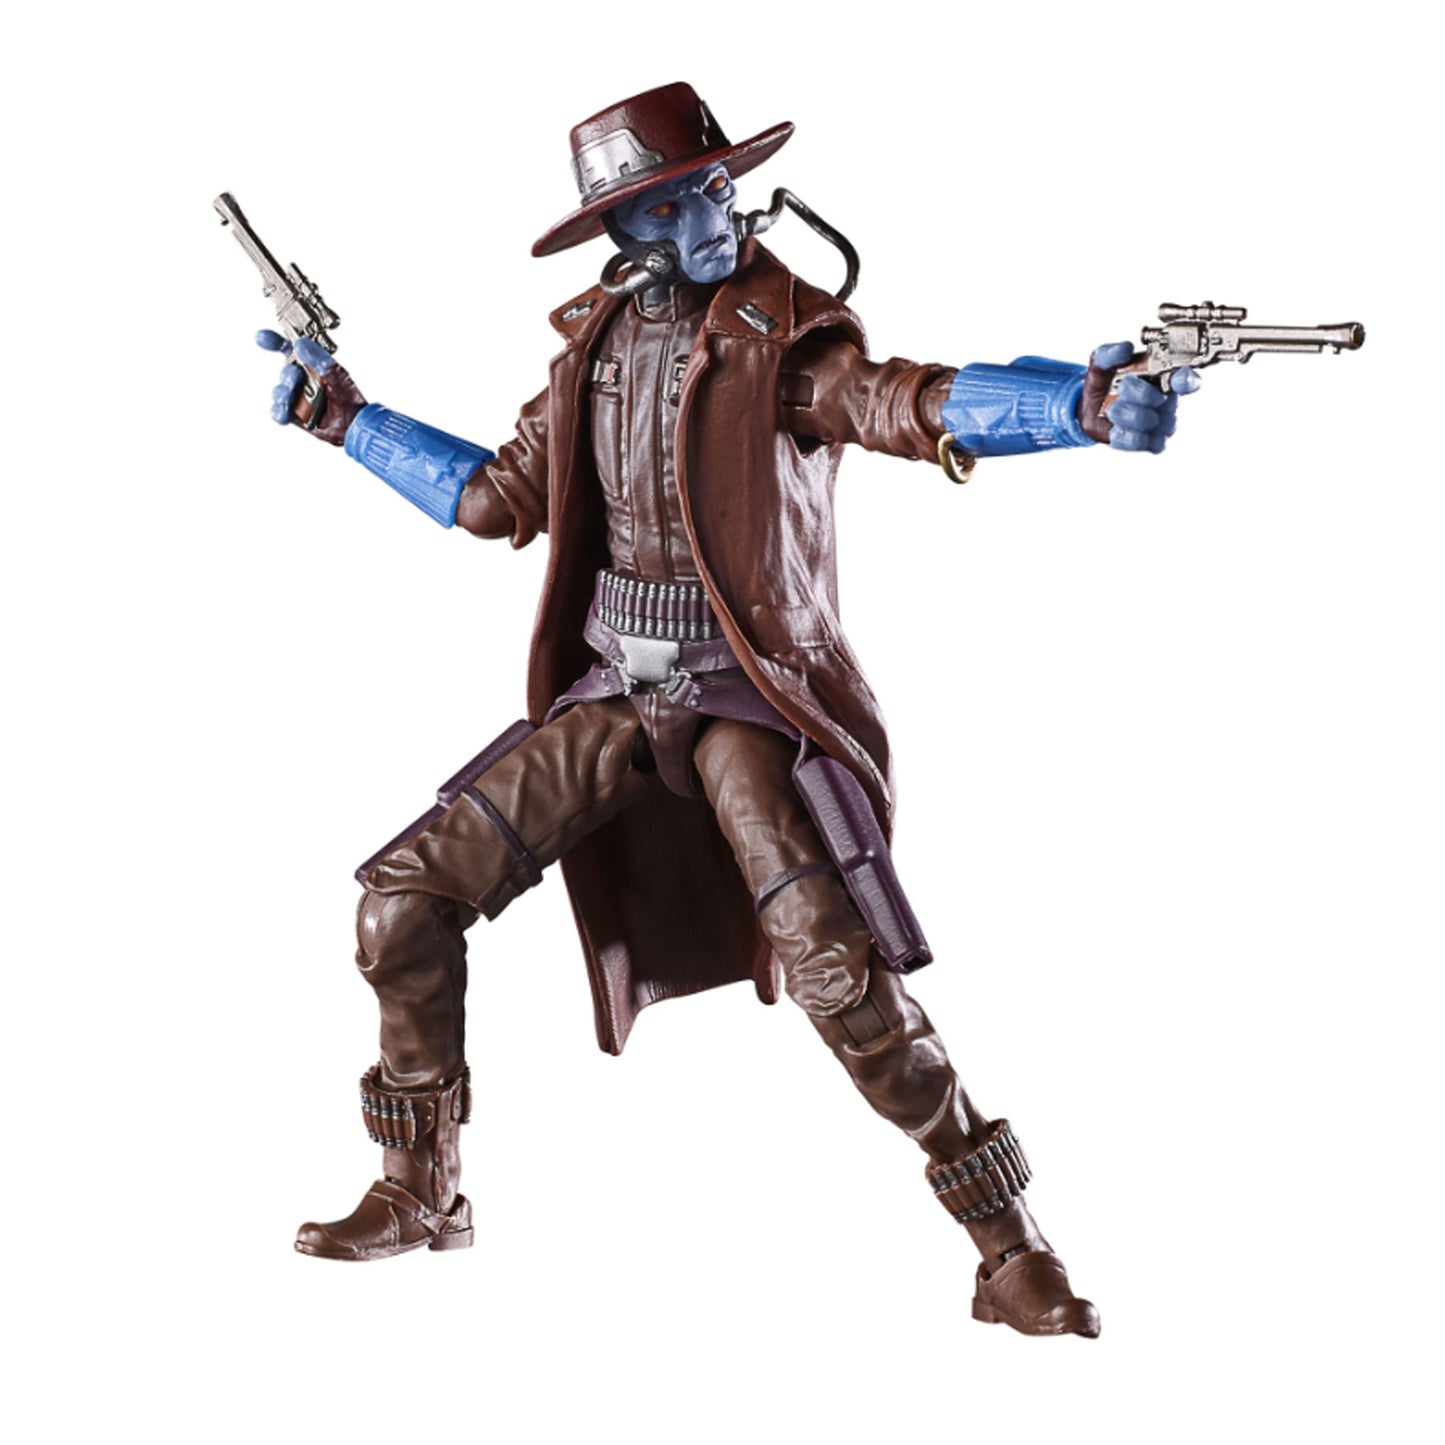 Star Wars The Black Series Cad Bane (The Book of Boba Fett)